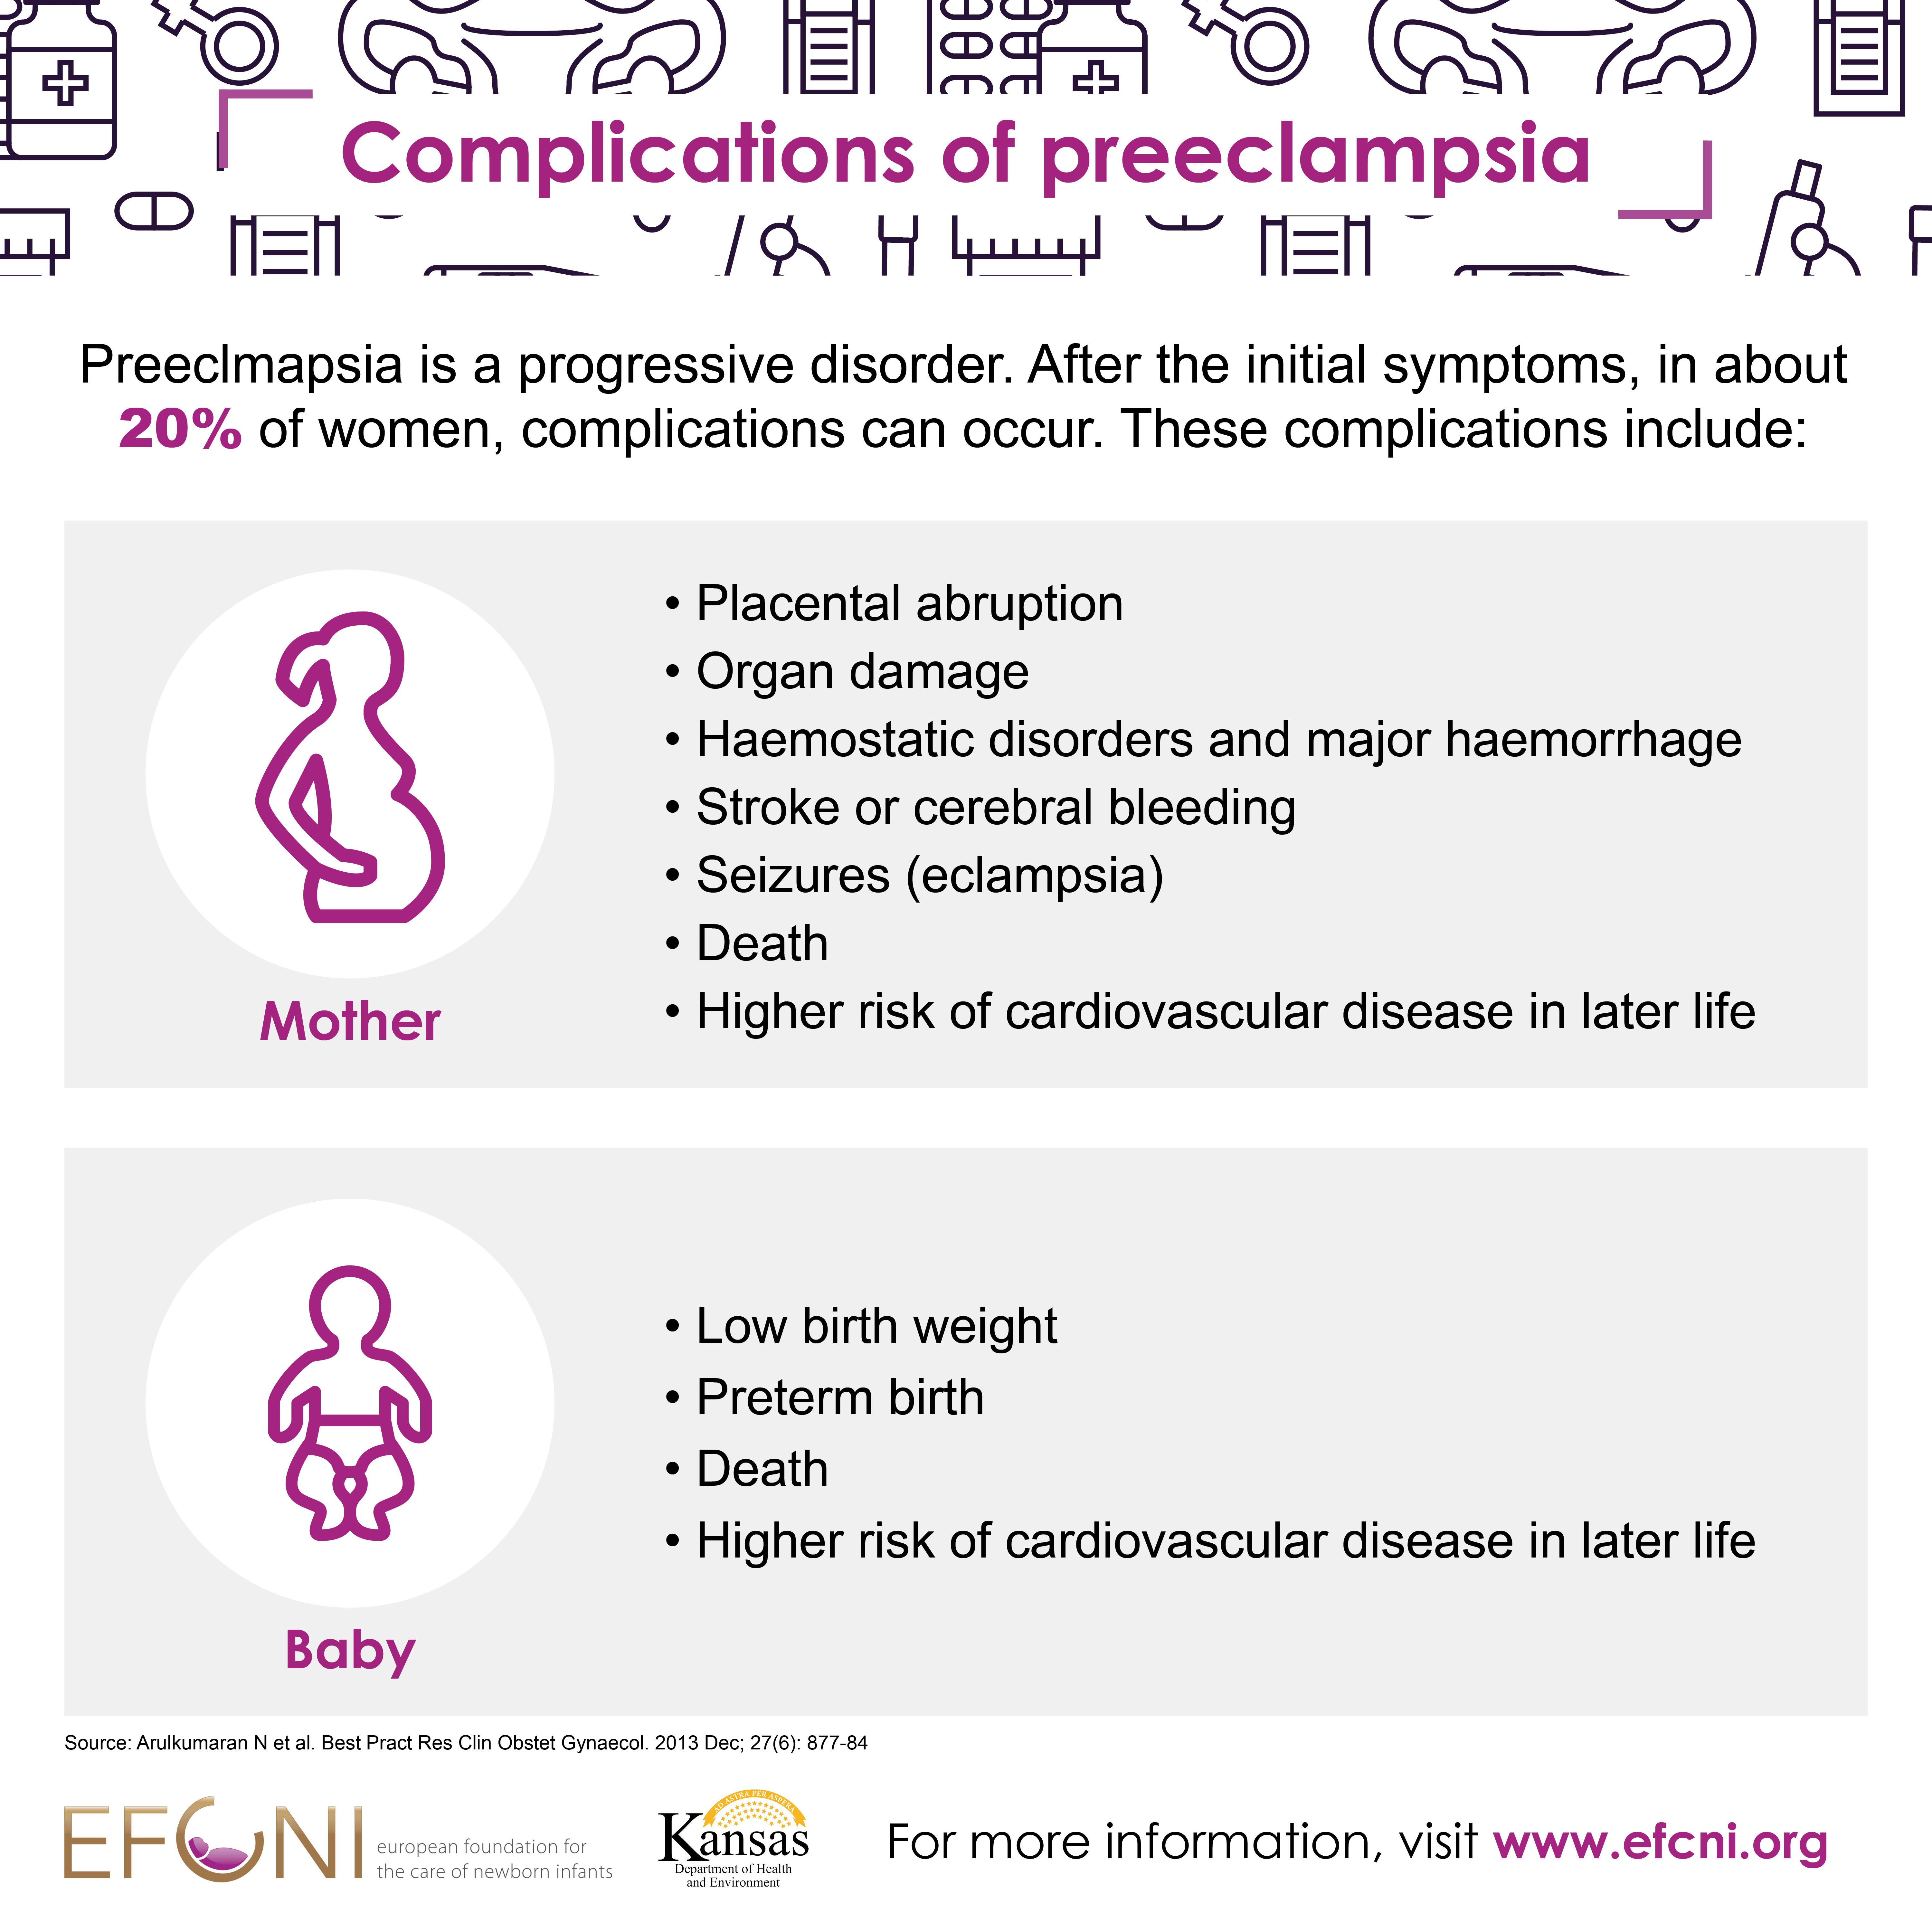 Preeclampsia Social Media Graphic - Did you know? - complications.jpg